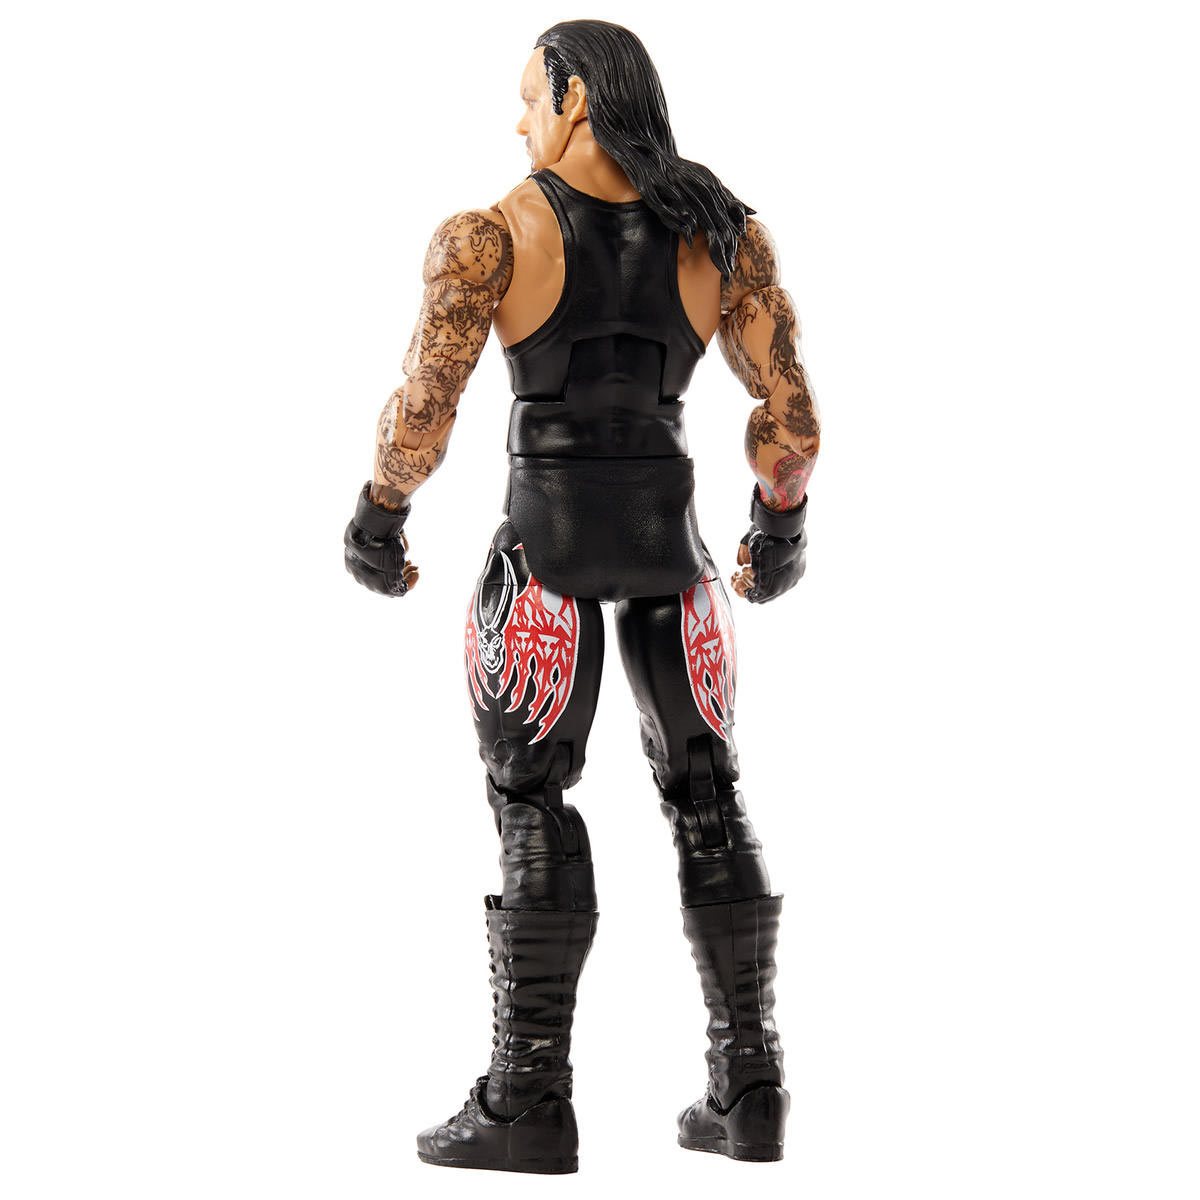 WWE World Wrestling Entertainment Undertaker Deluxe 6 Inch Action Figure Toy 